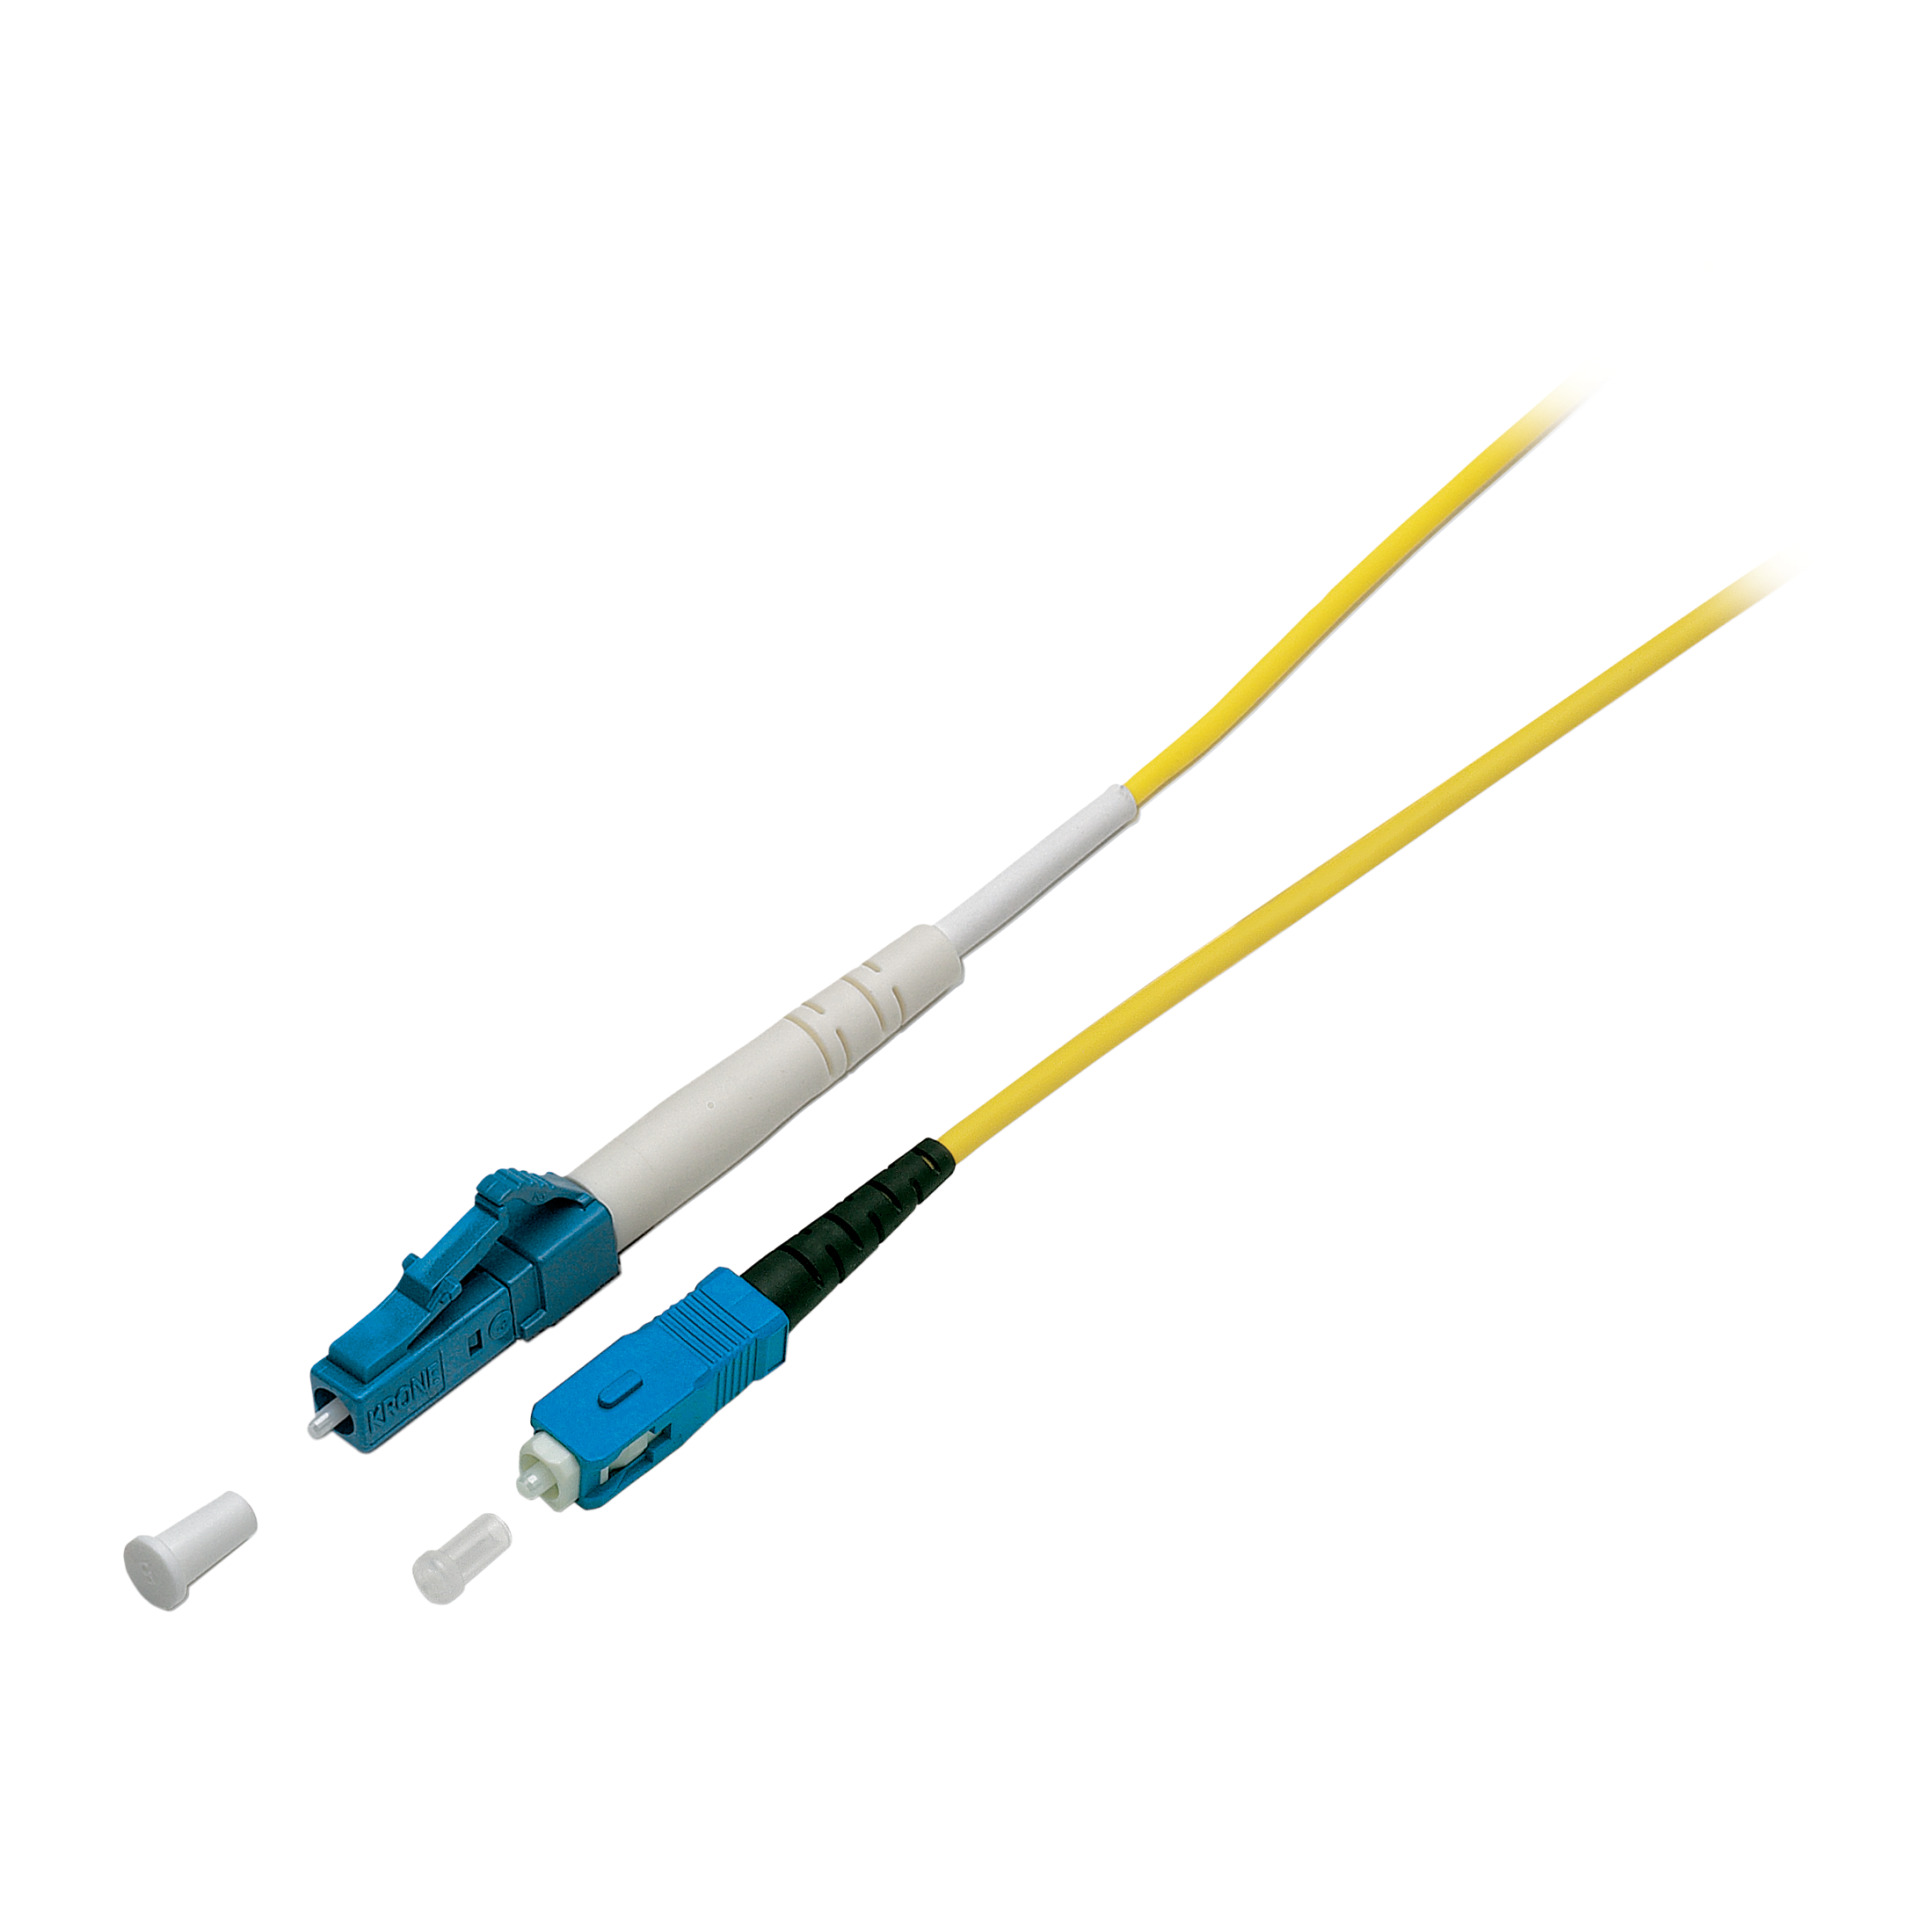 Simplex FO Patch Cable LC-SC G657.A2 20m 2,0mm yellow 9/125µm